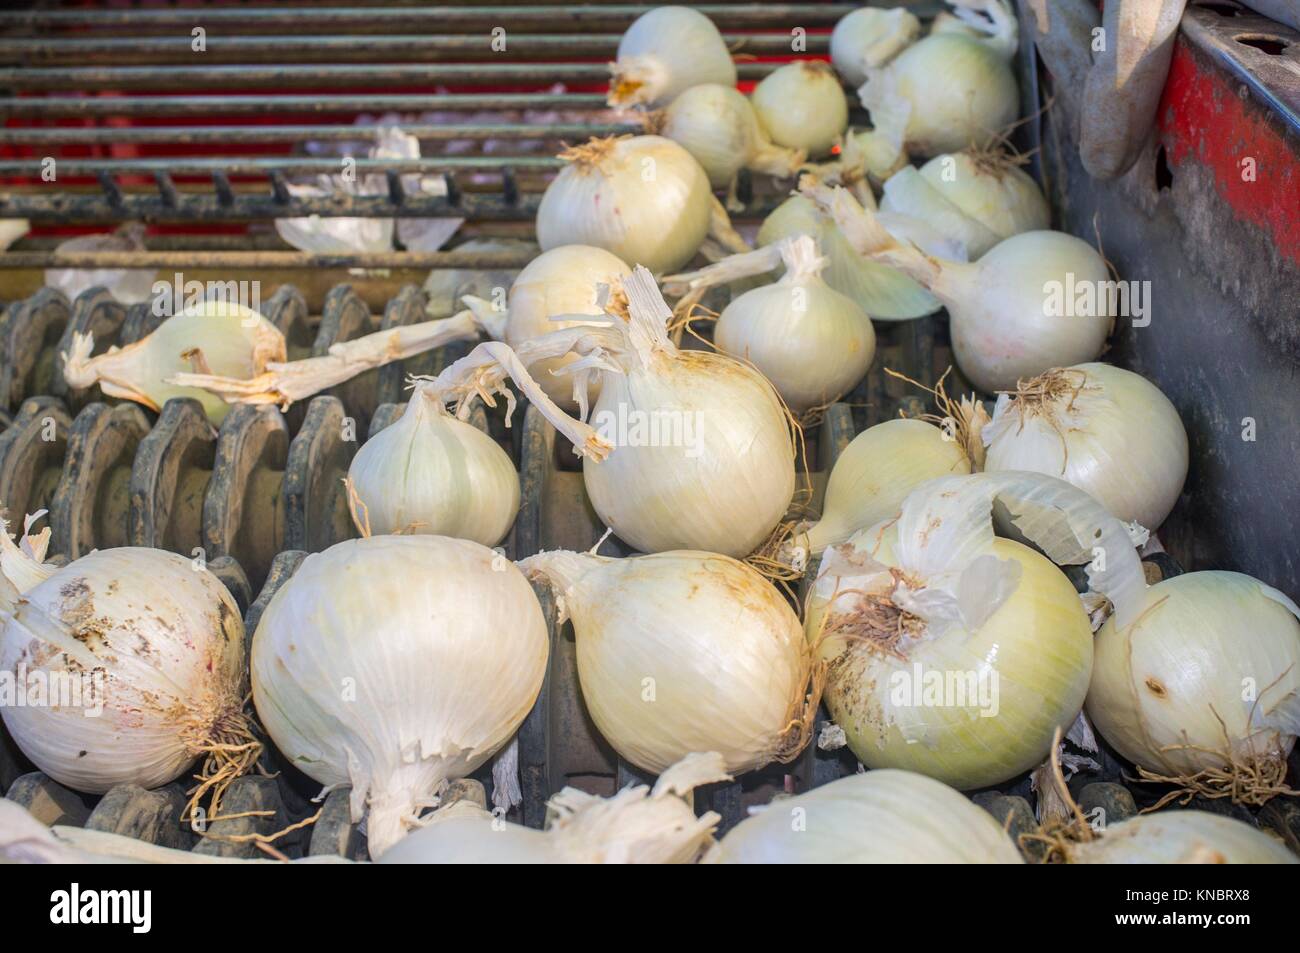 Onion harvester at work. Workers removing rotten onions and clods from conveyor belt platform. Badajoz, Spain. Stock Photo